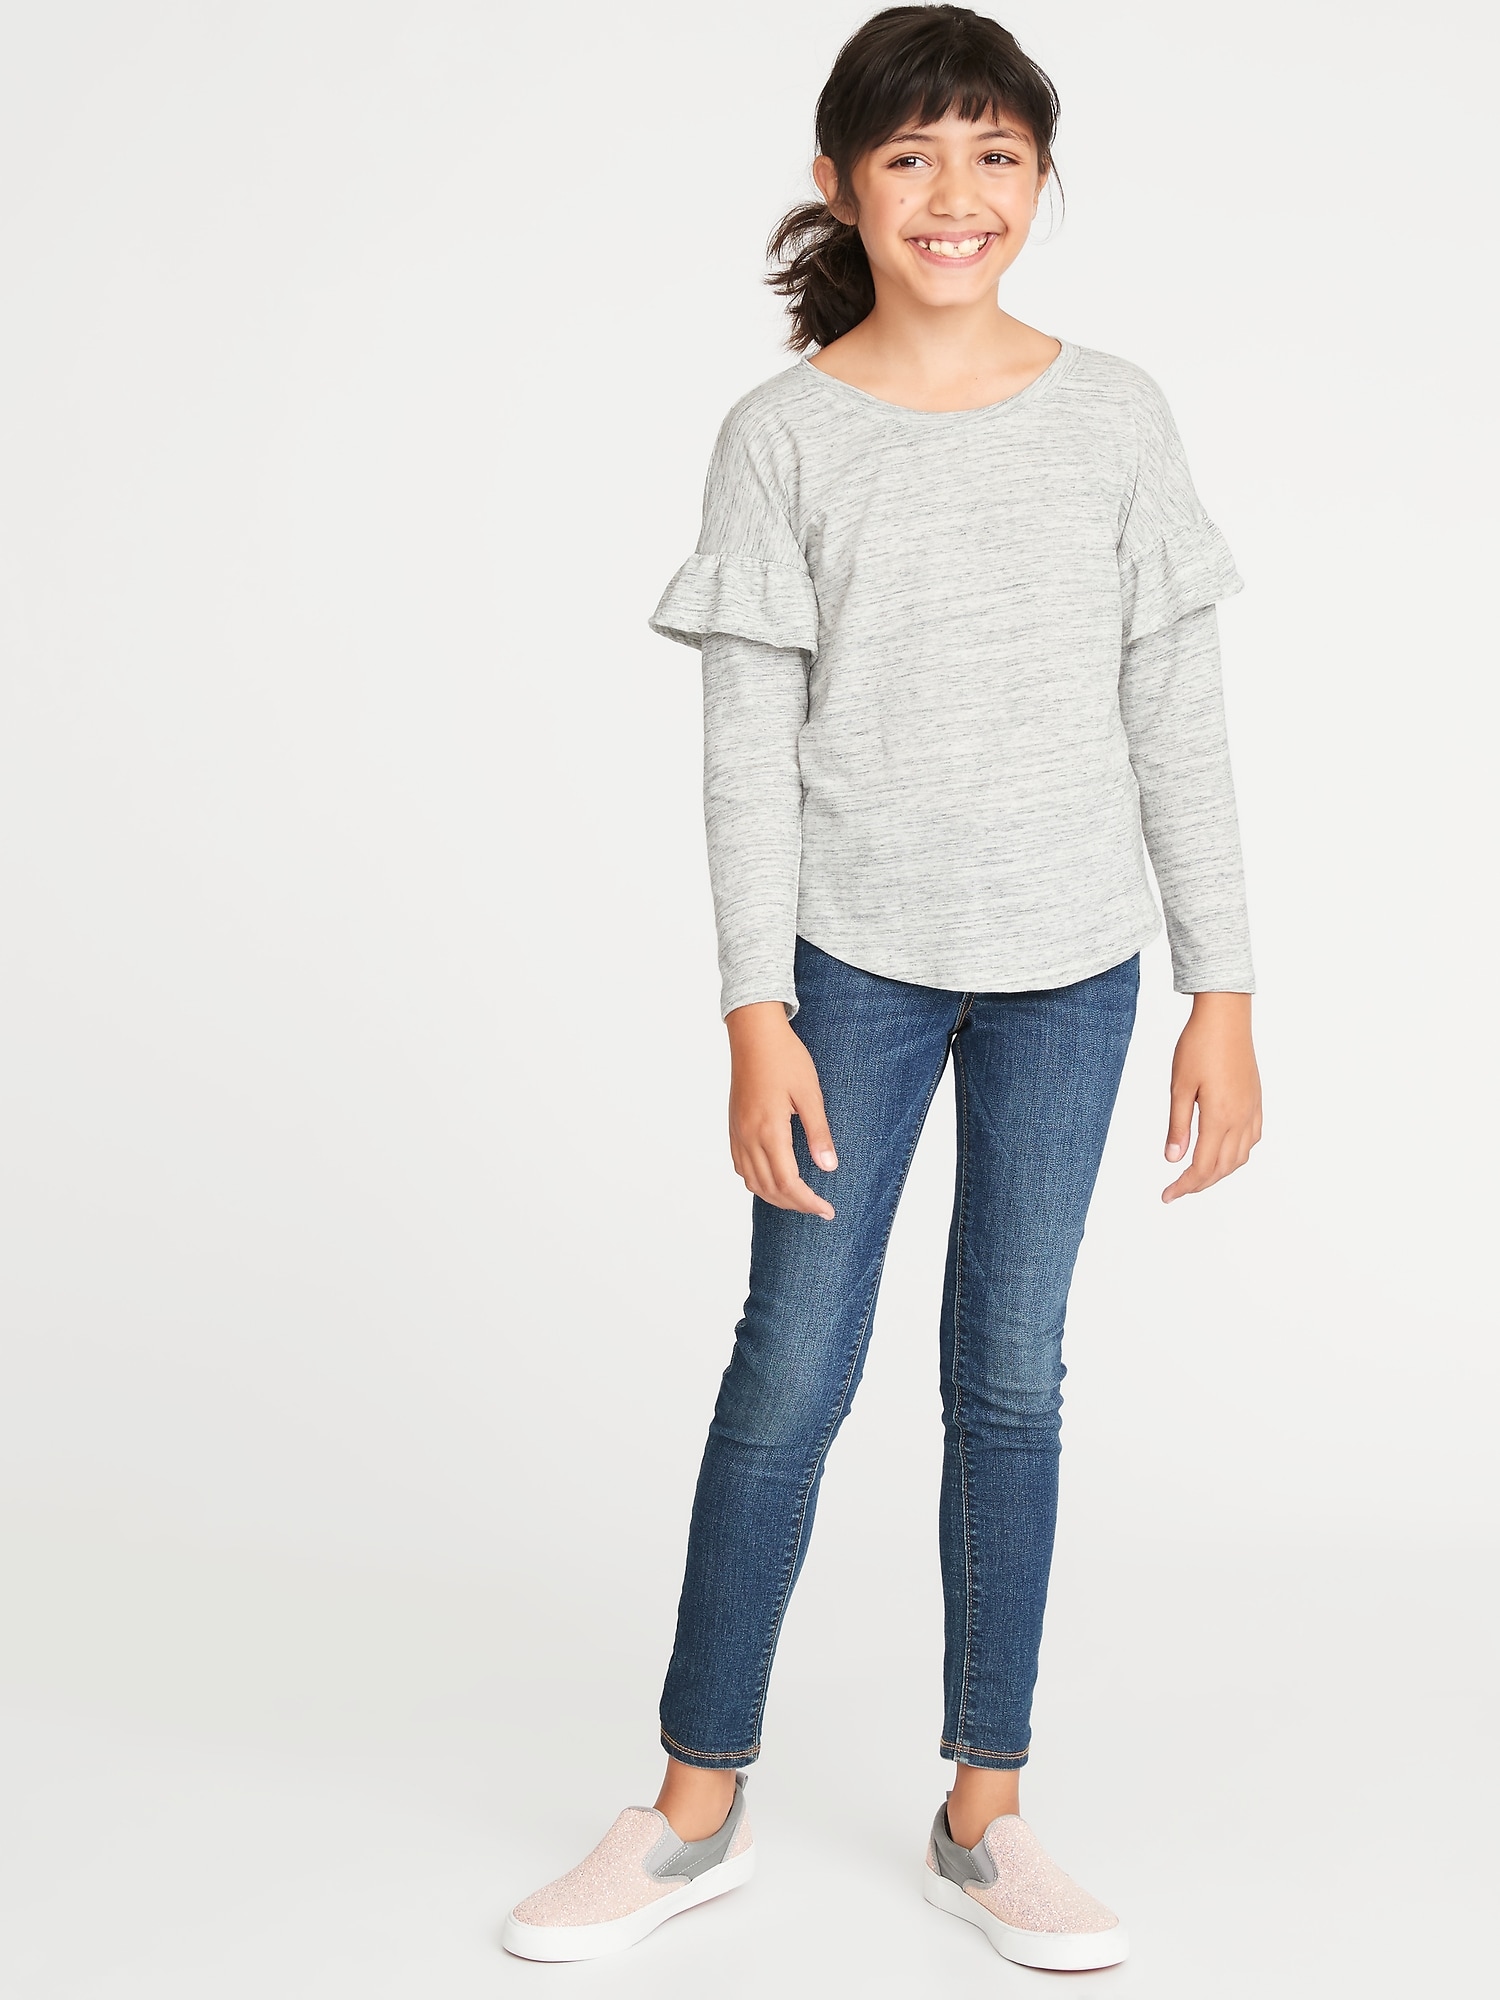 Relaxed Ruffle-Trim Top for Girls | Old Navy